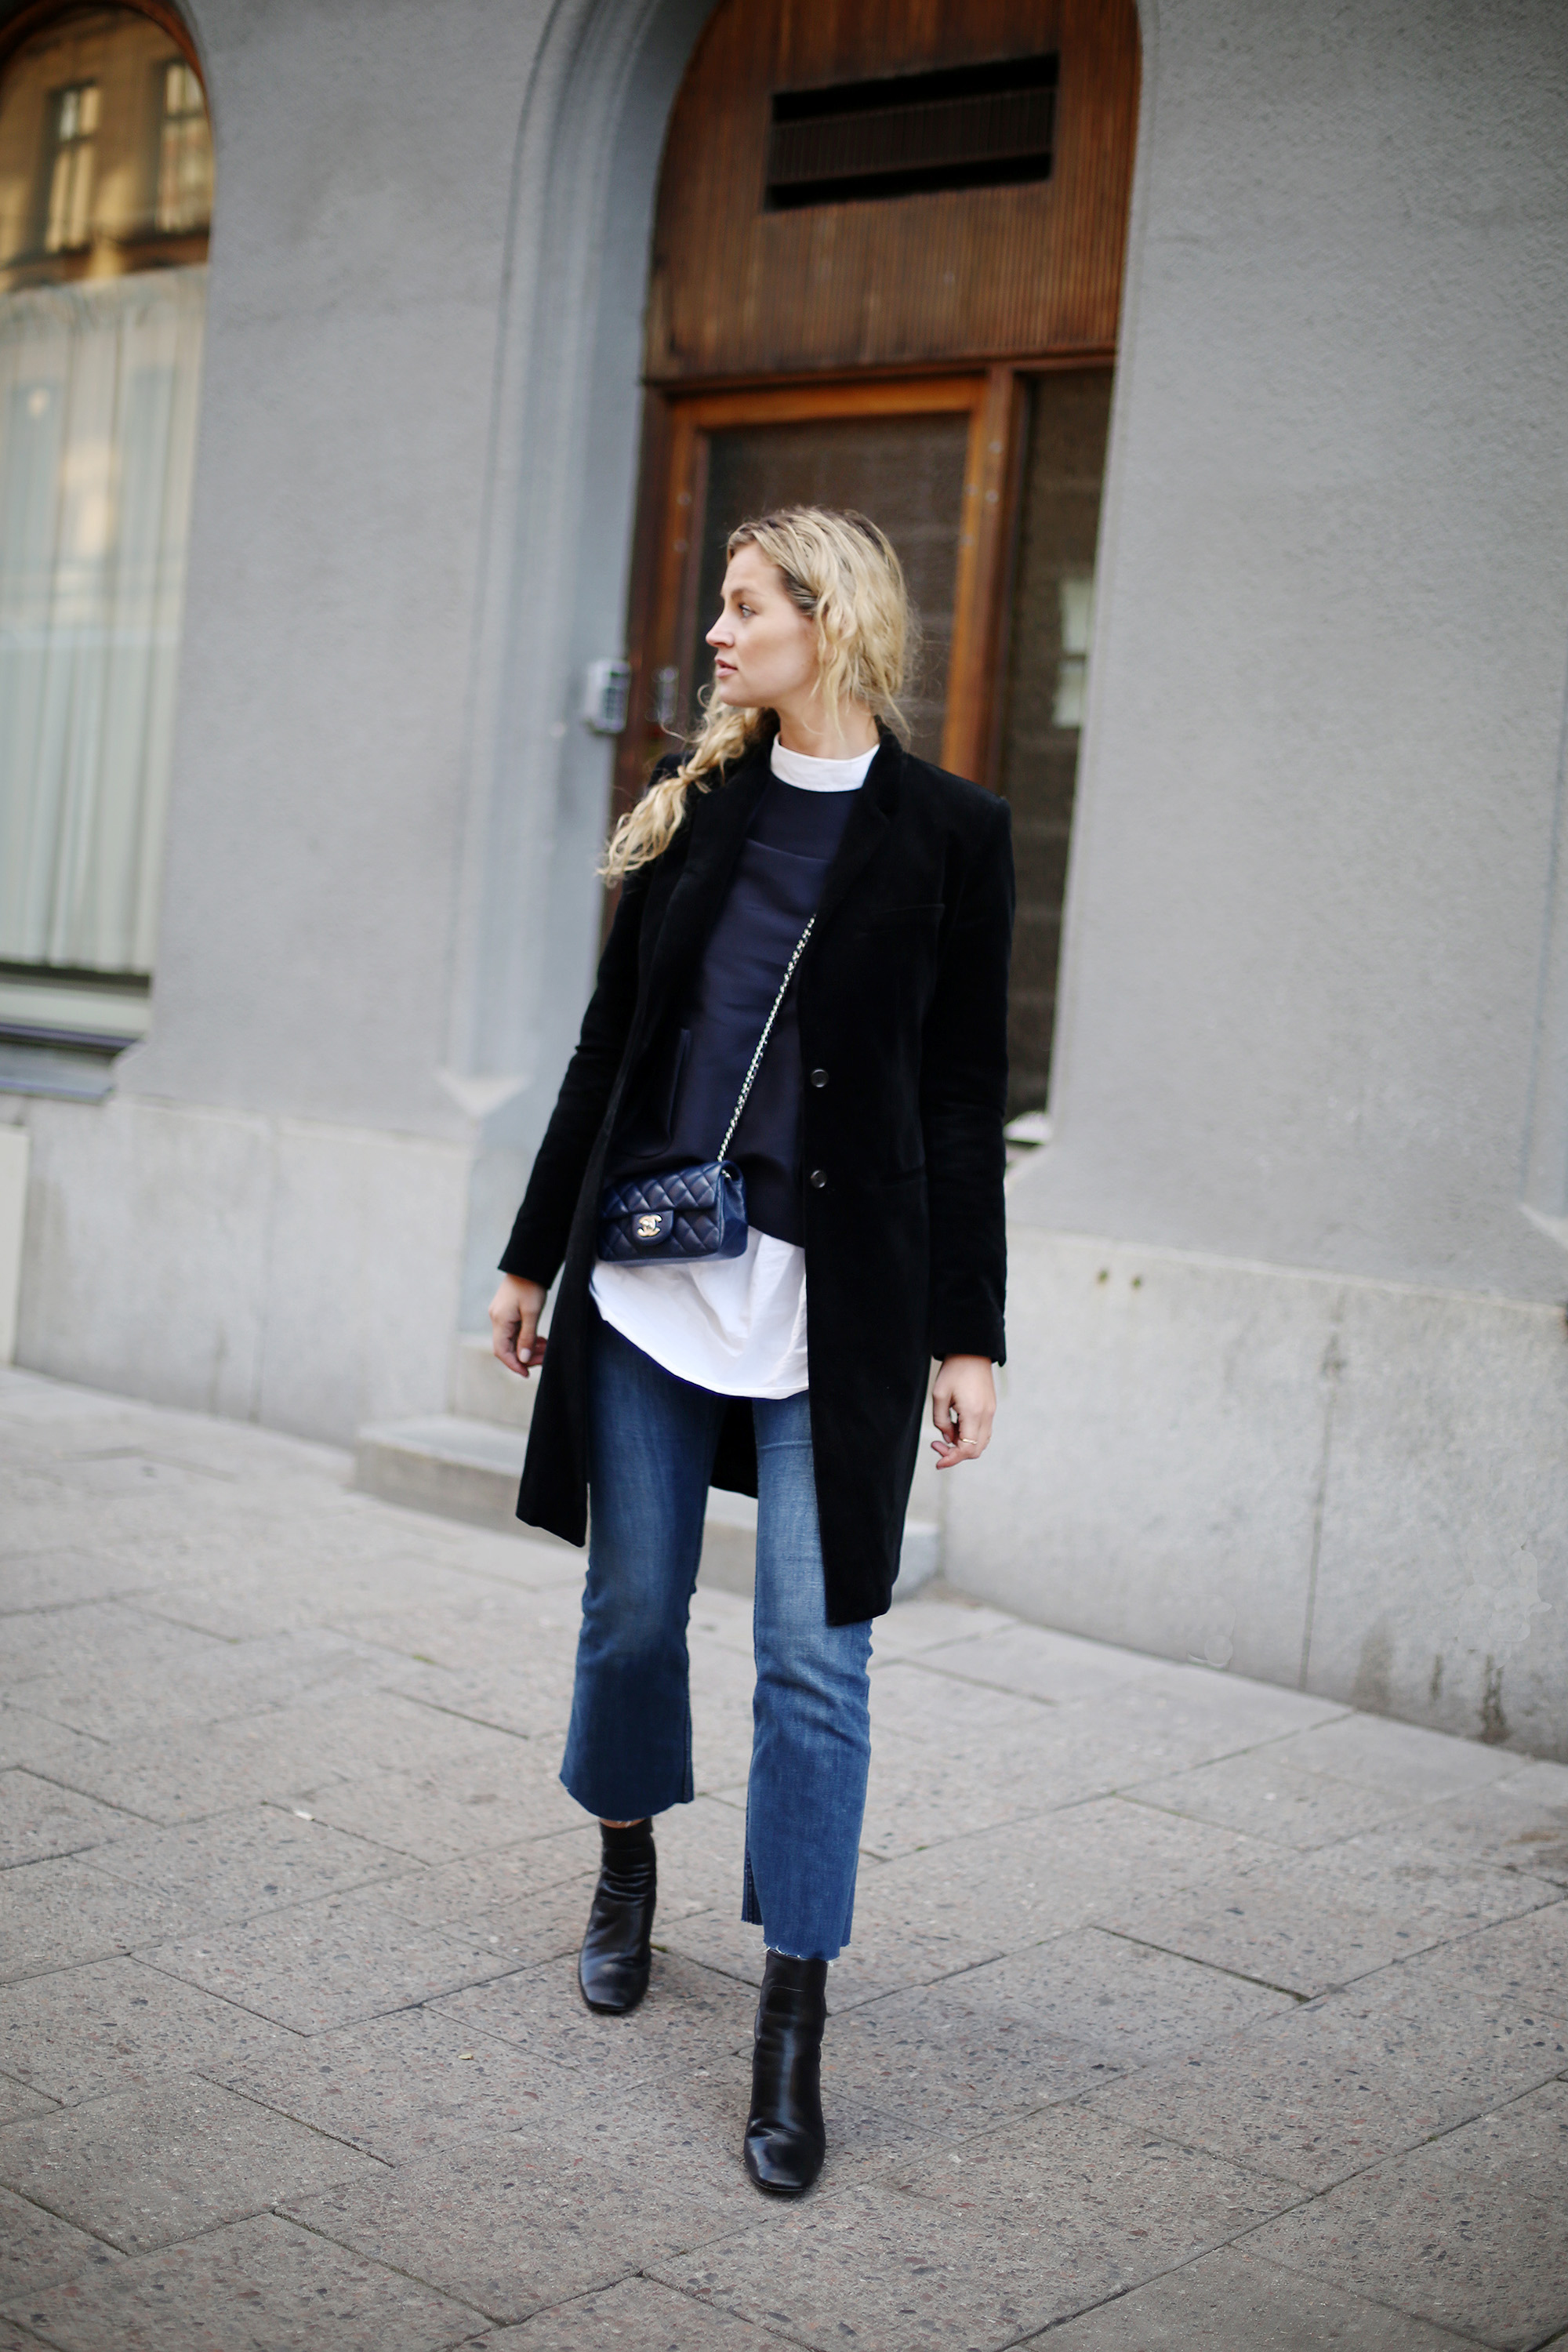 Spotted: Cropped Denim + Boots – Honestly WTF